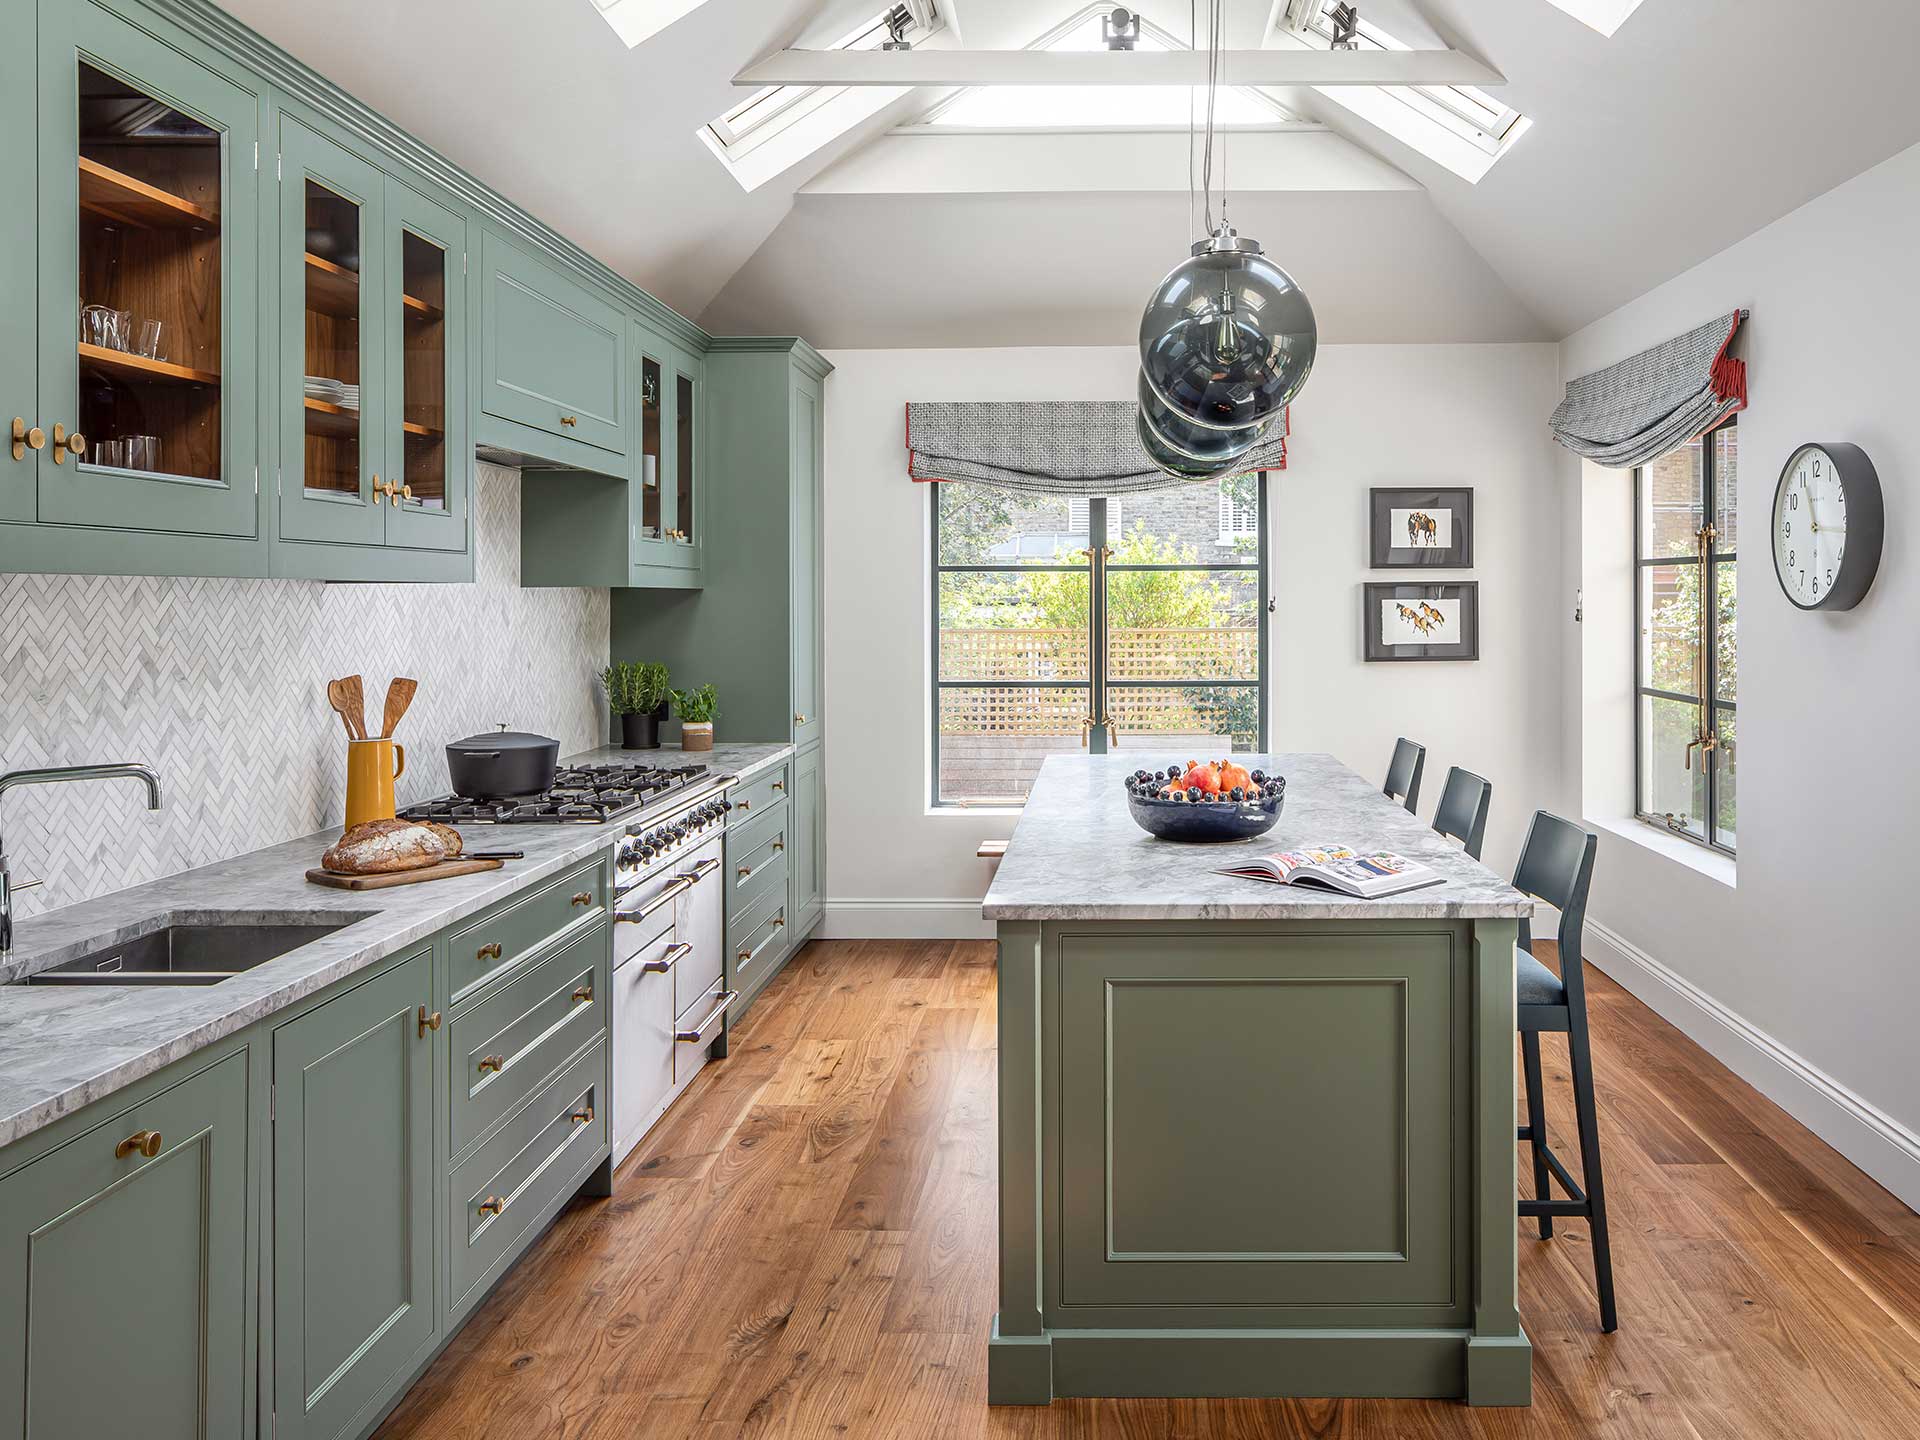 Skylights and rooflights can flood light into your kitchen